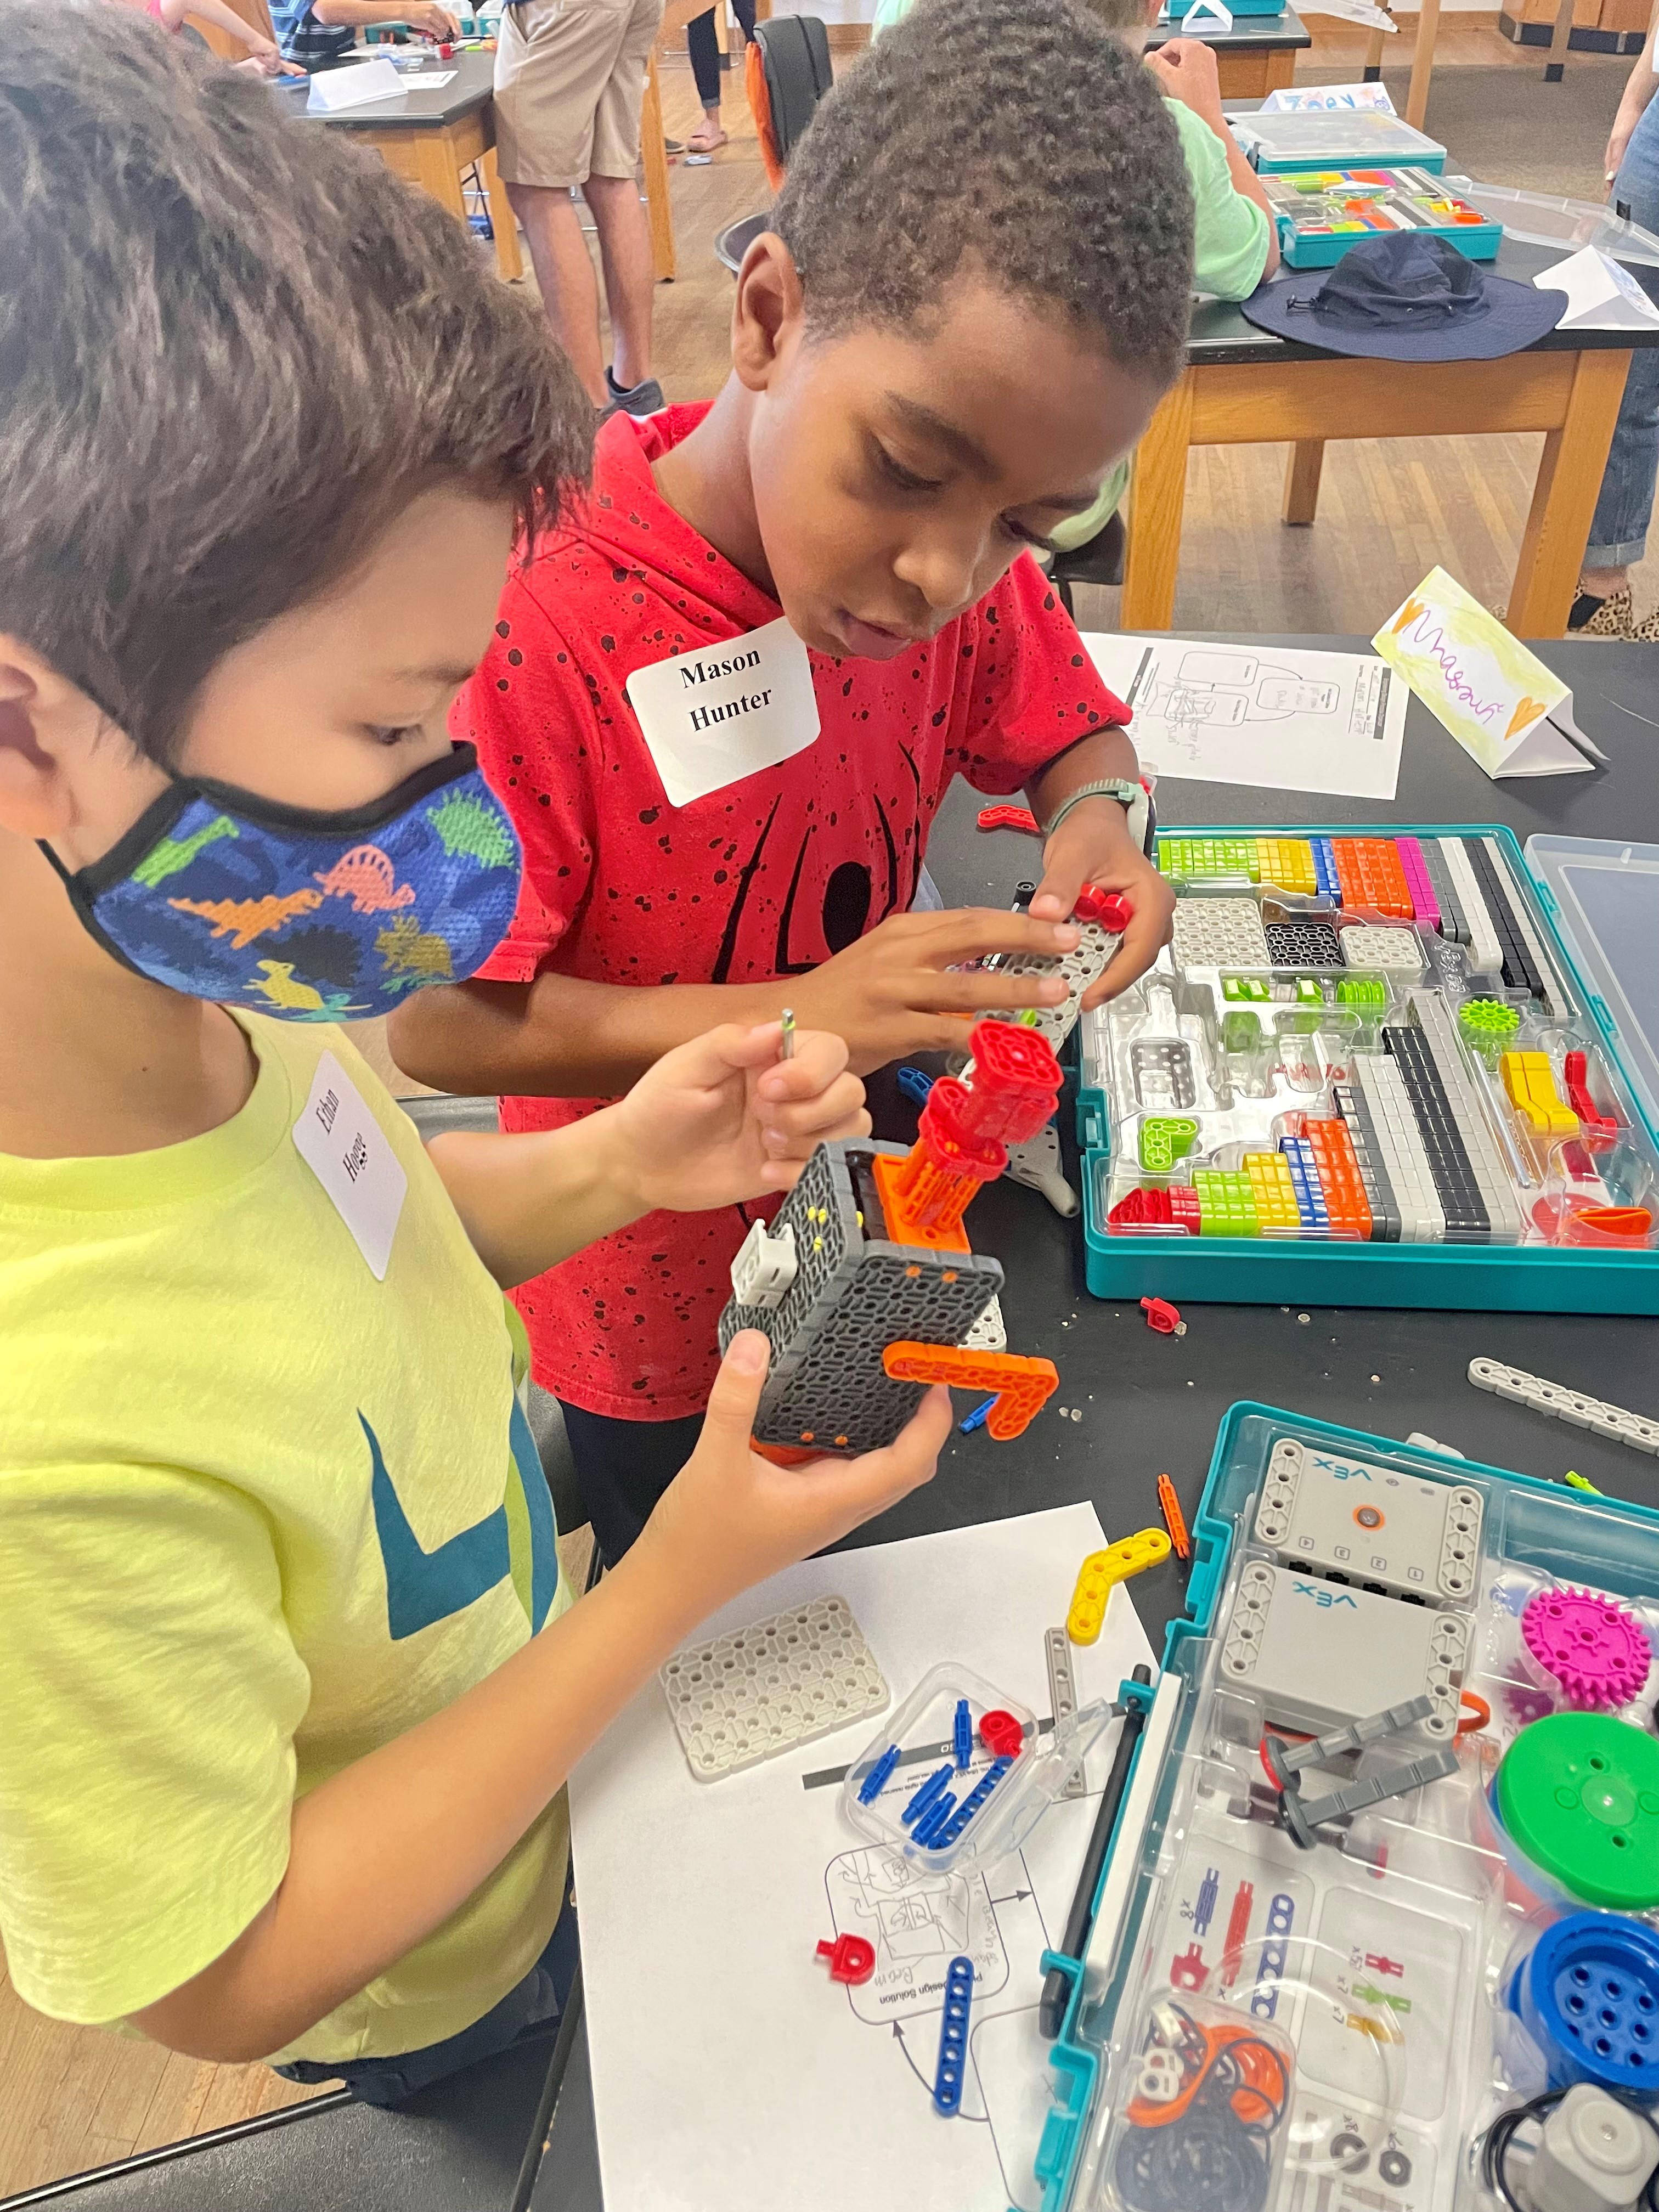 SCORE’s VEX GO and VEX IQ Competition Camps engage elementary students in STEM and robotics education, foster critical thinking and teamwork skills